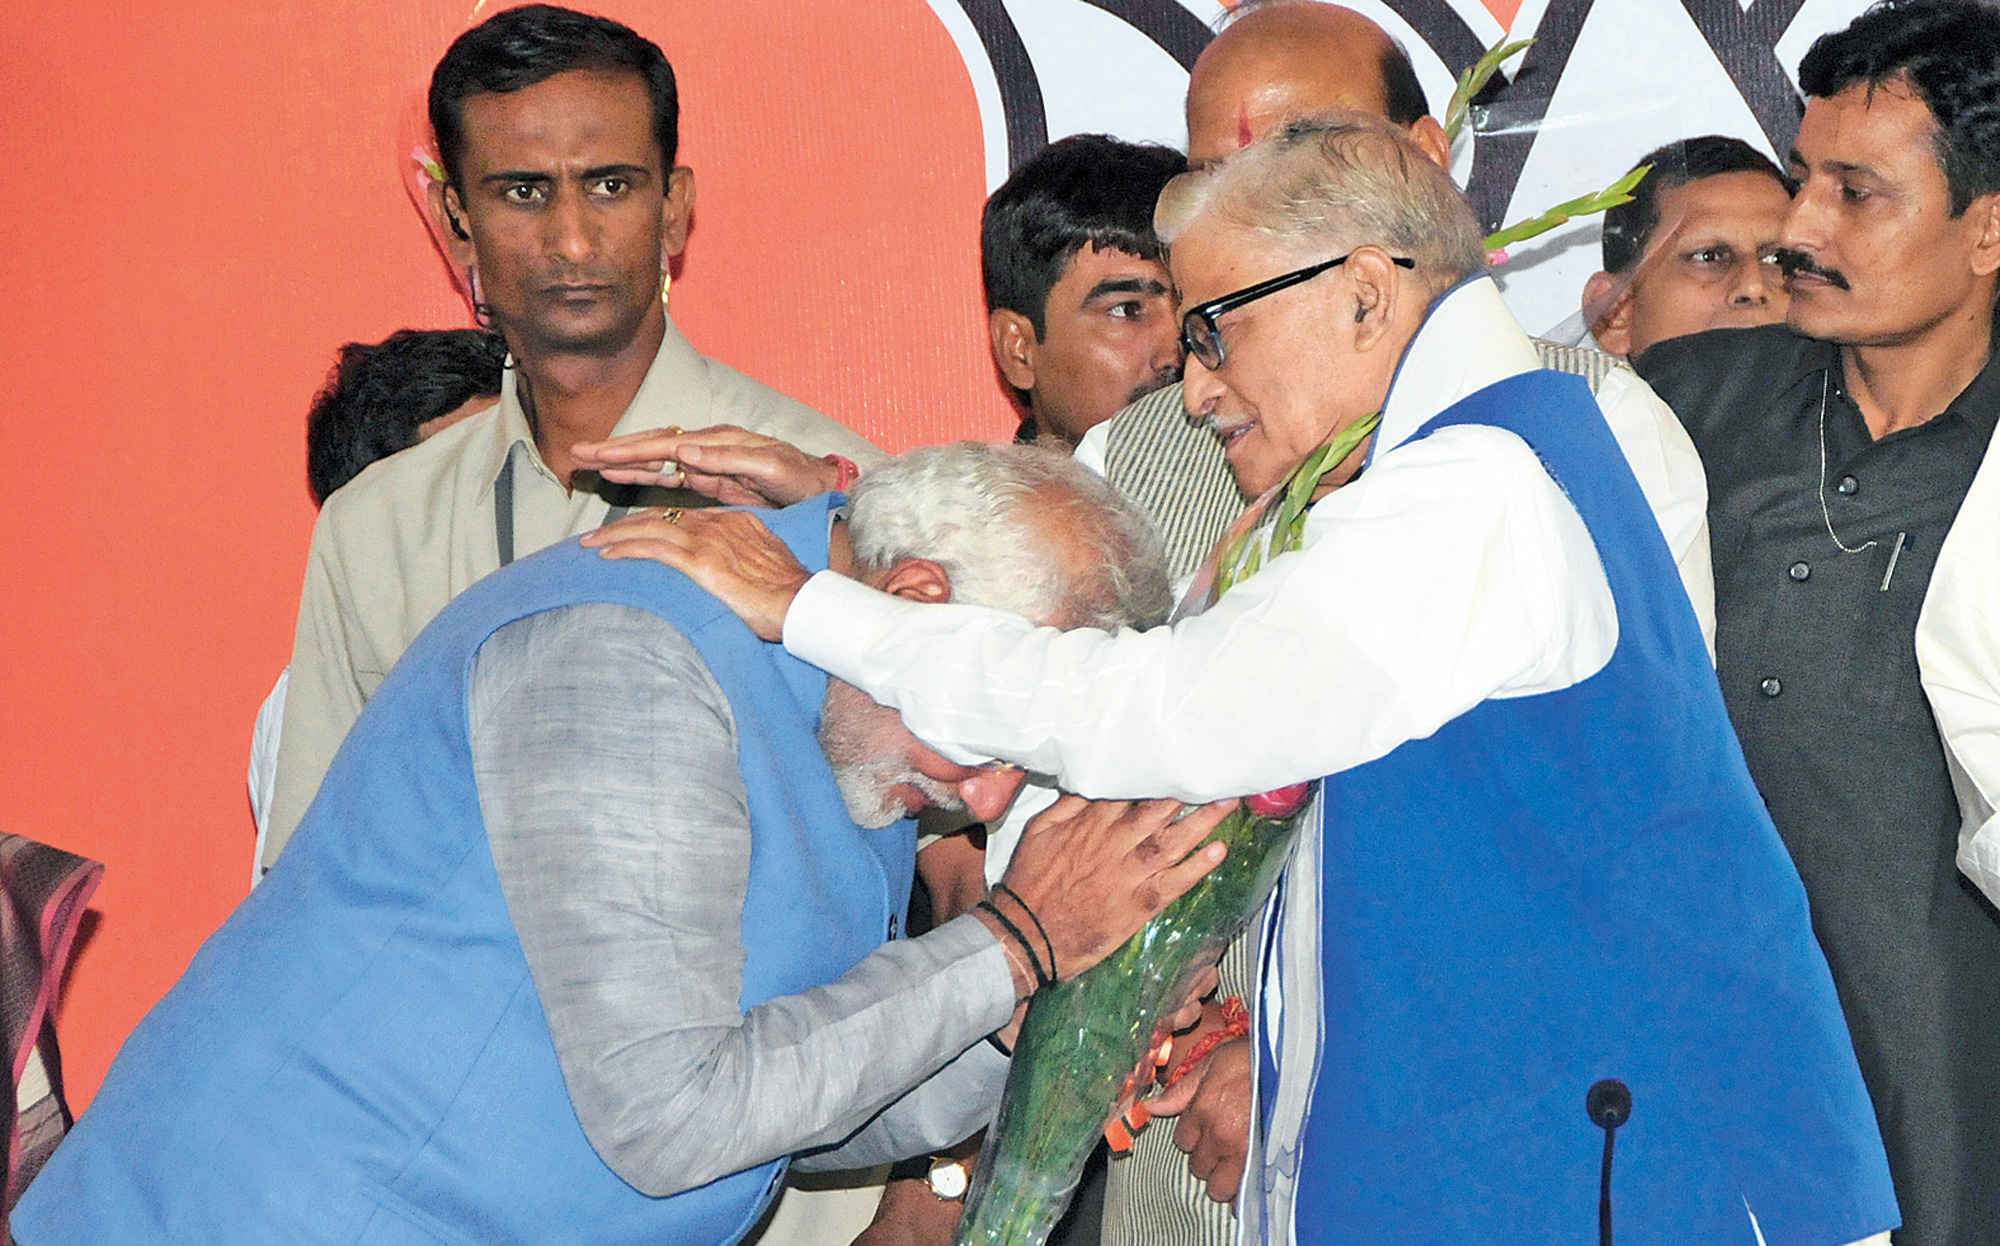 On May 17, 2014, a day after winning the general election and a little over a week before taking oath as Prime Minister, Narendra Modi seeks the blessings of Murli Manohar Joshi at the BJP headquarters in New Delhi.